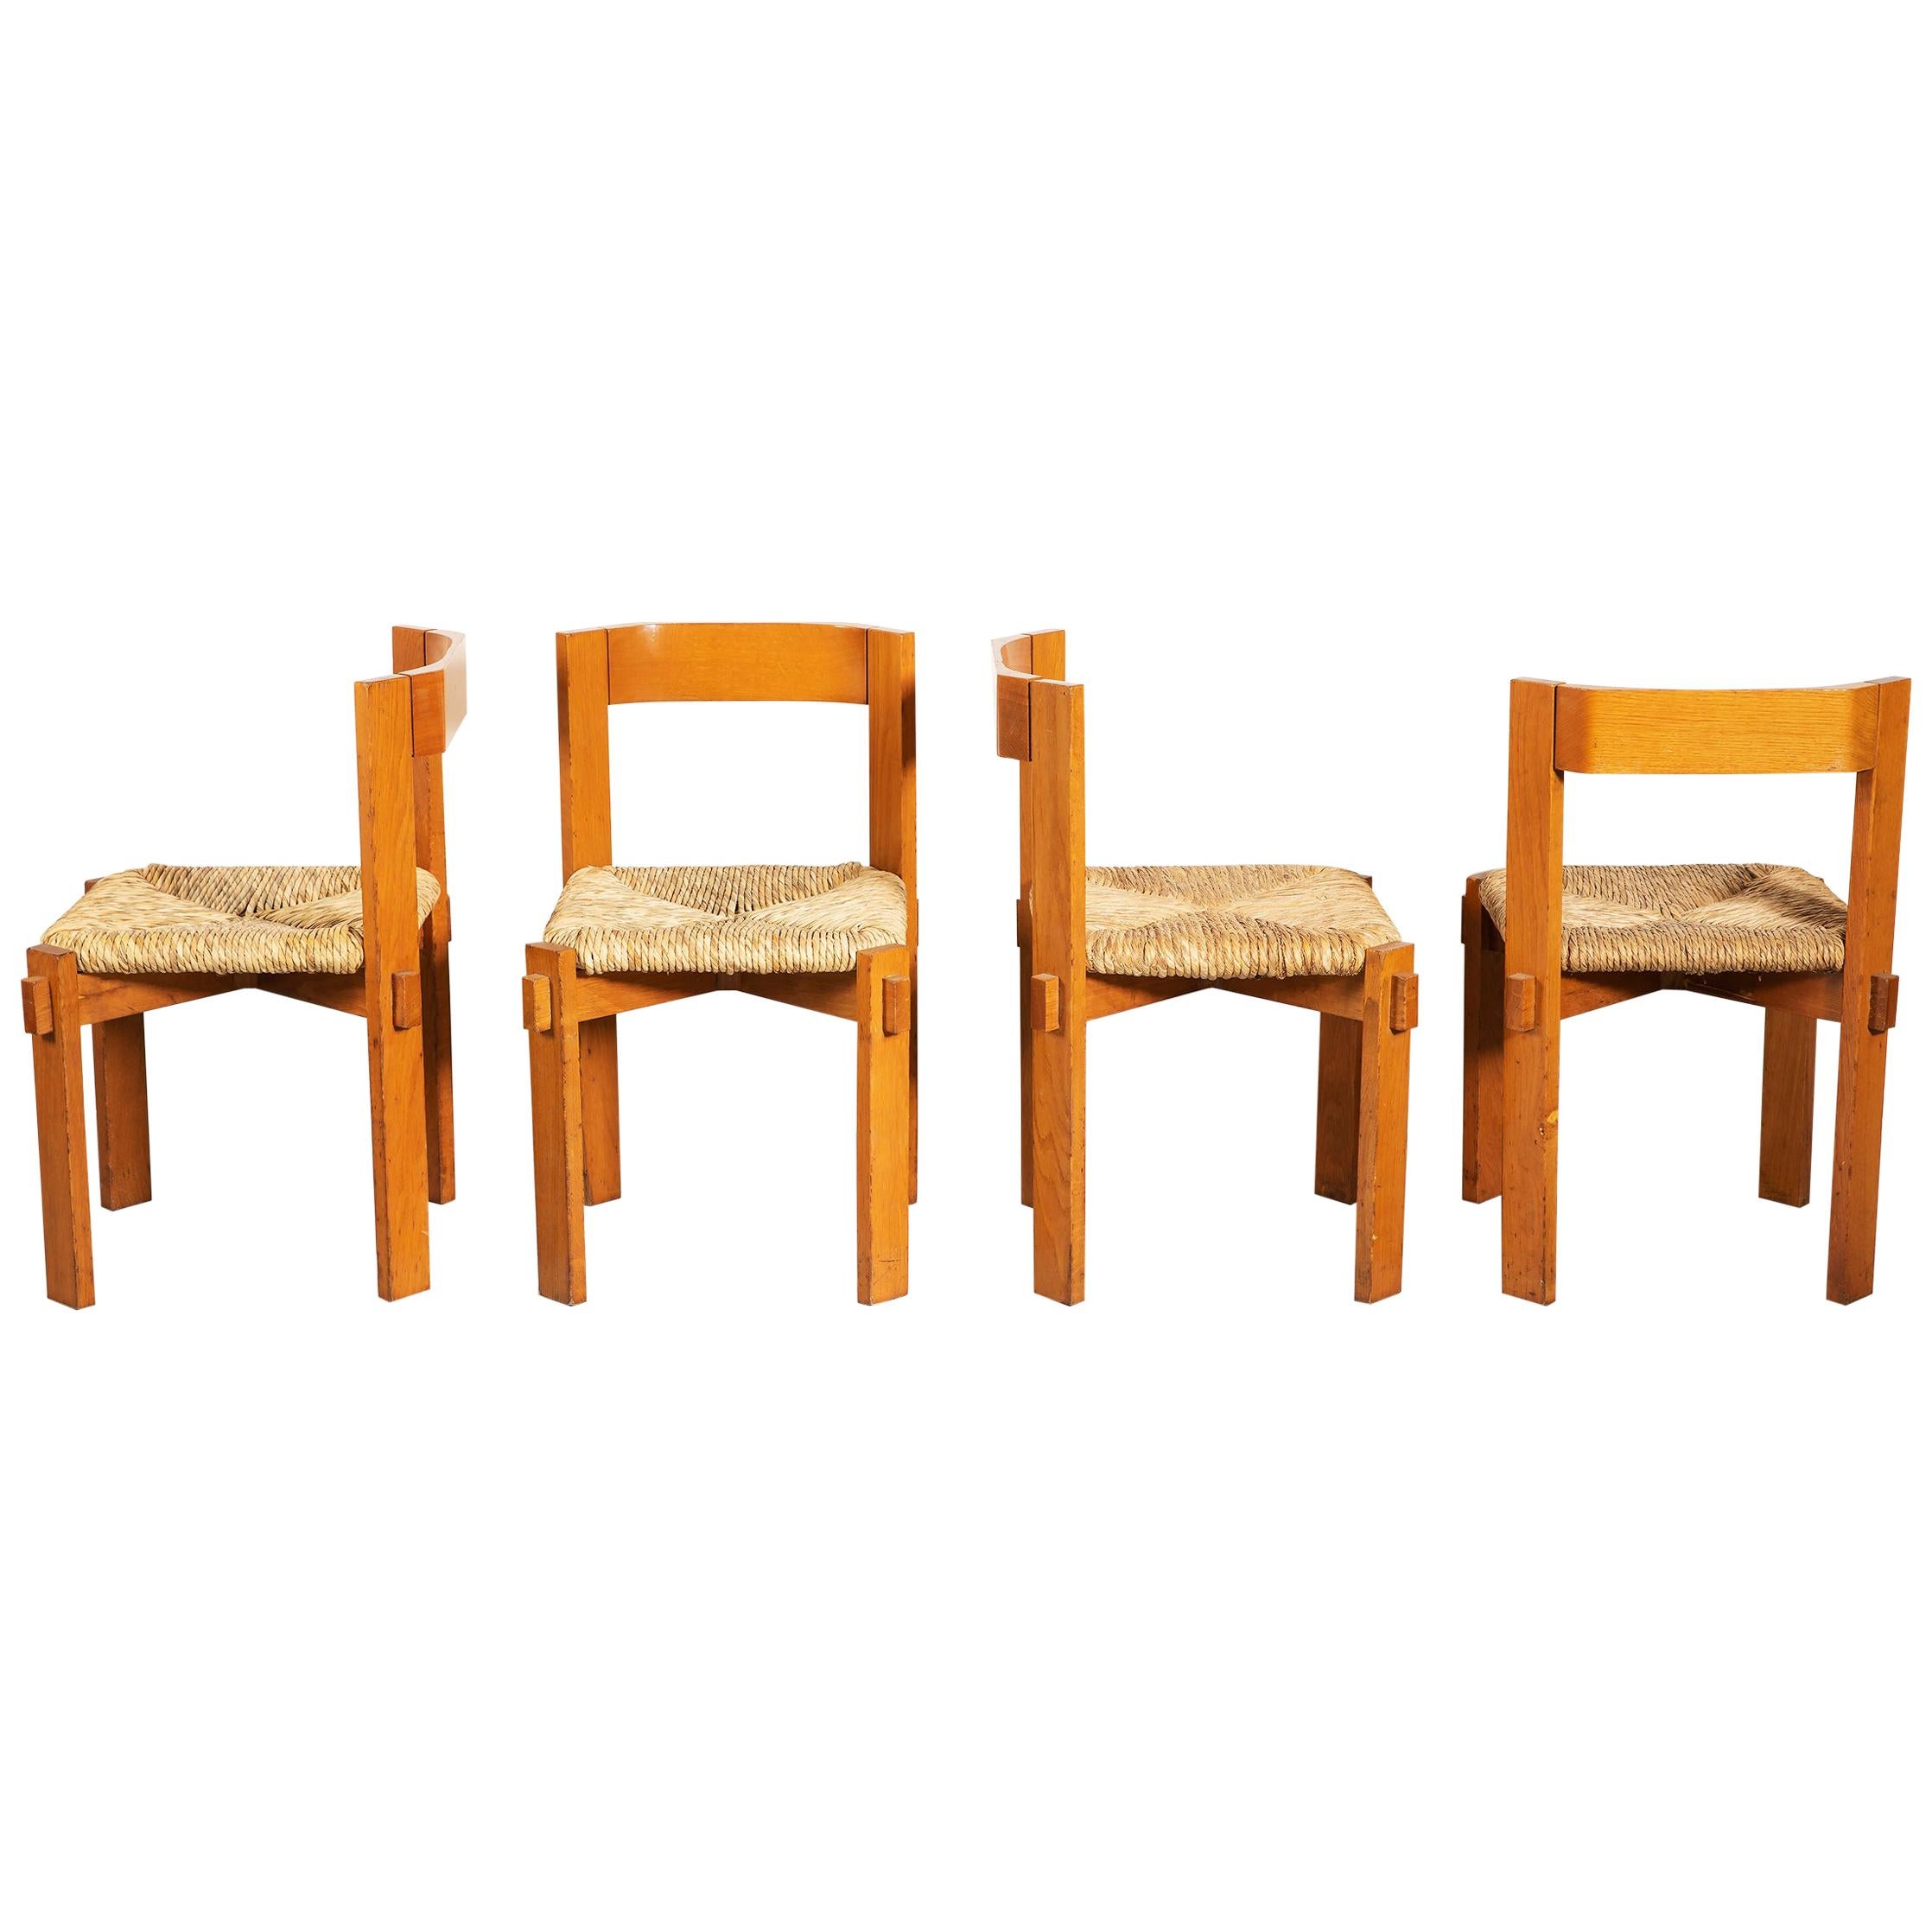 Set of Four Modernist Italian Oakwood and Straw Chairs, 1950s For Sale